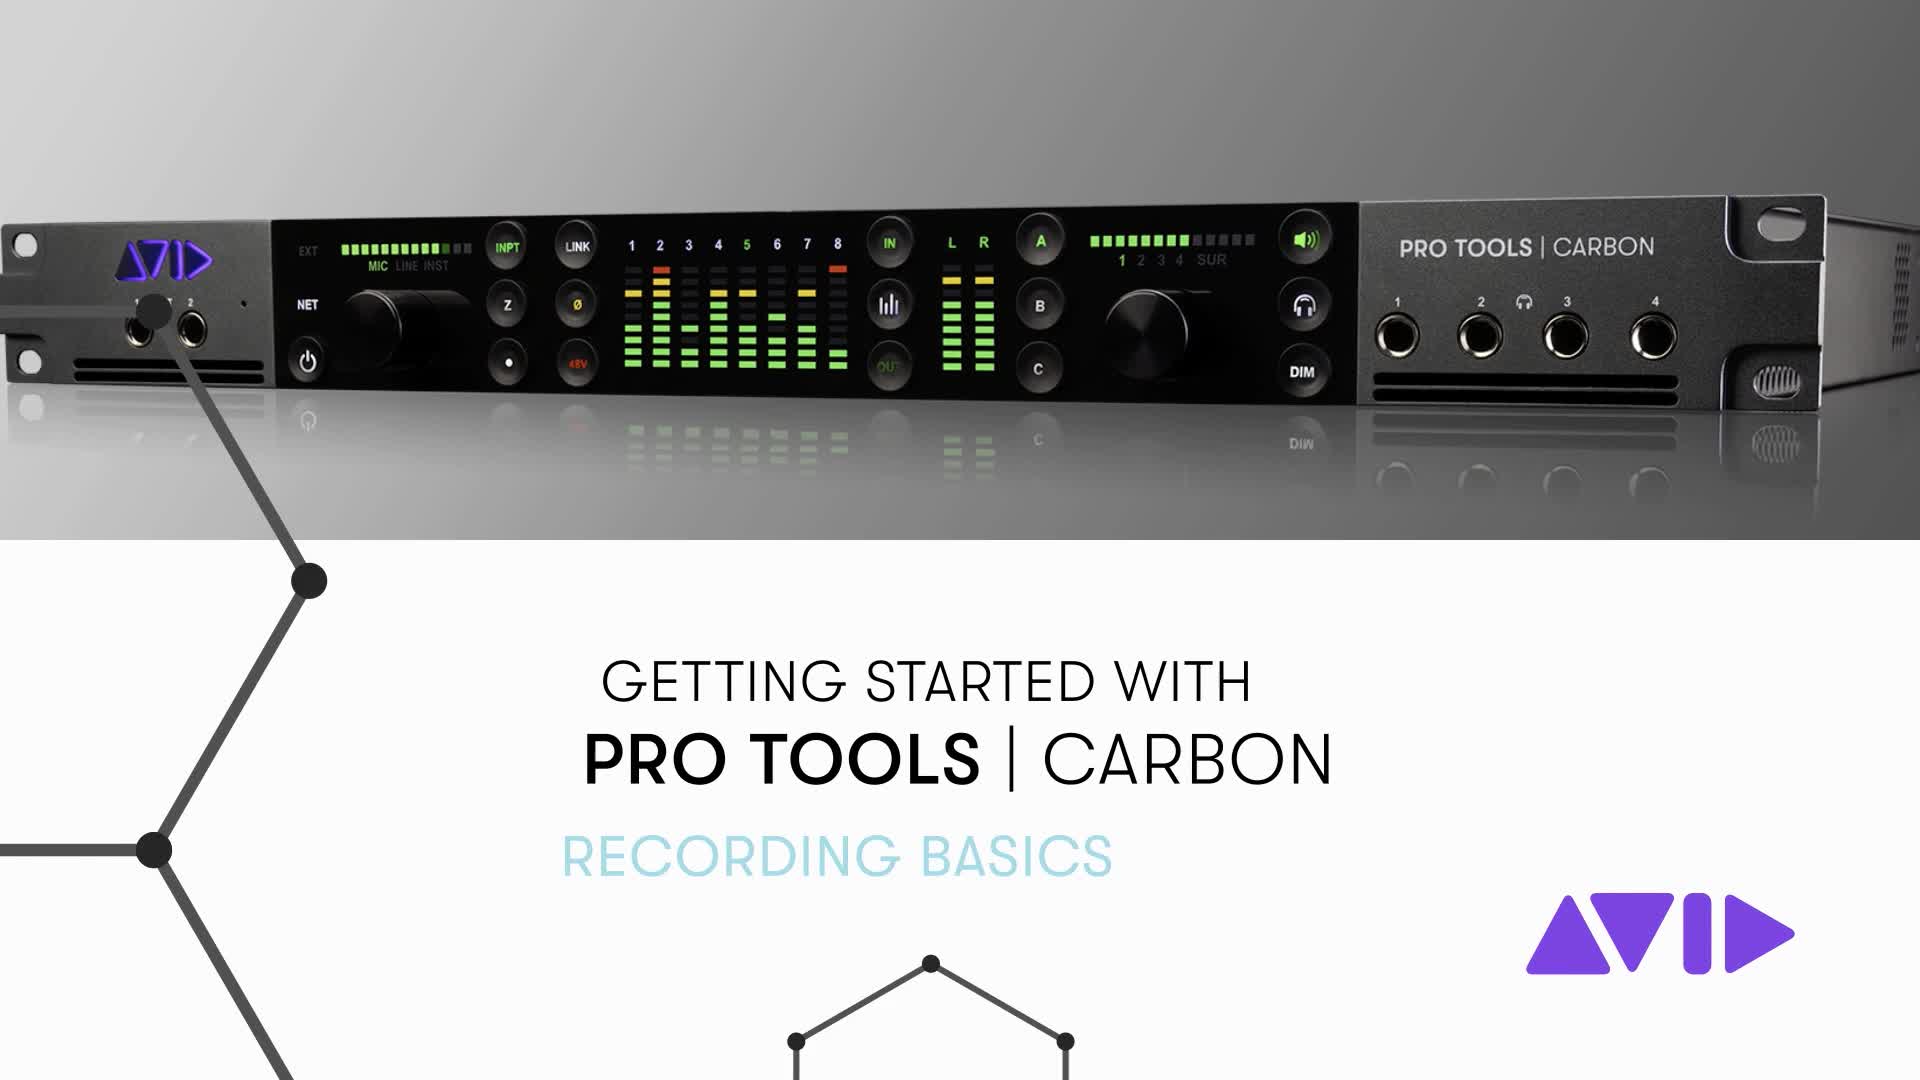 08 Pro Tools Carbon Getting Started – Recording Basics